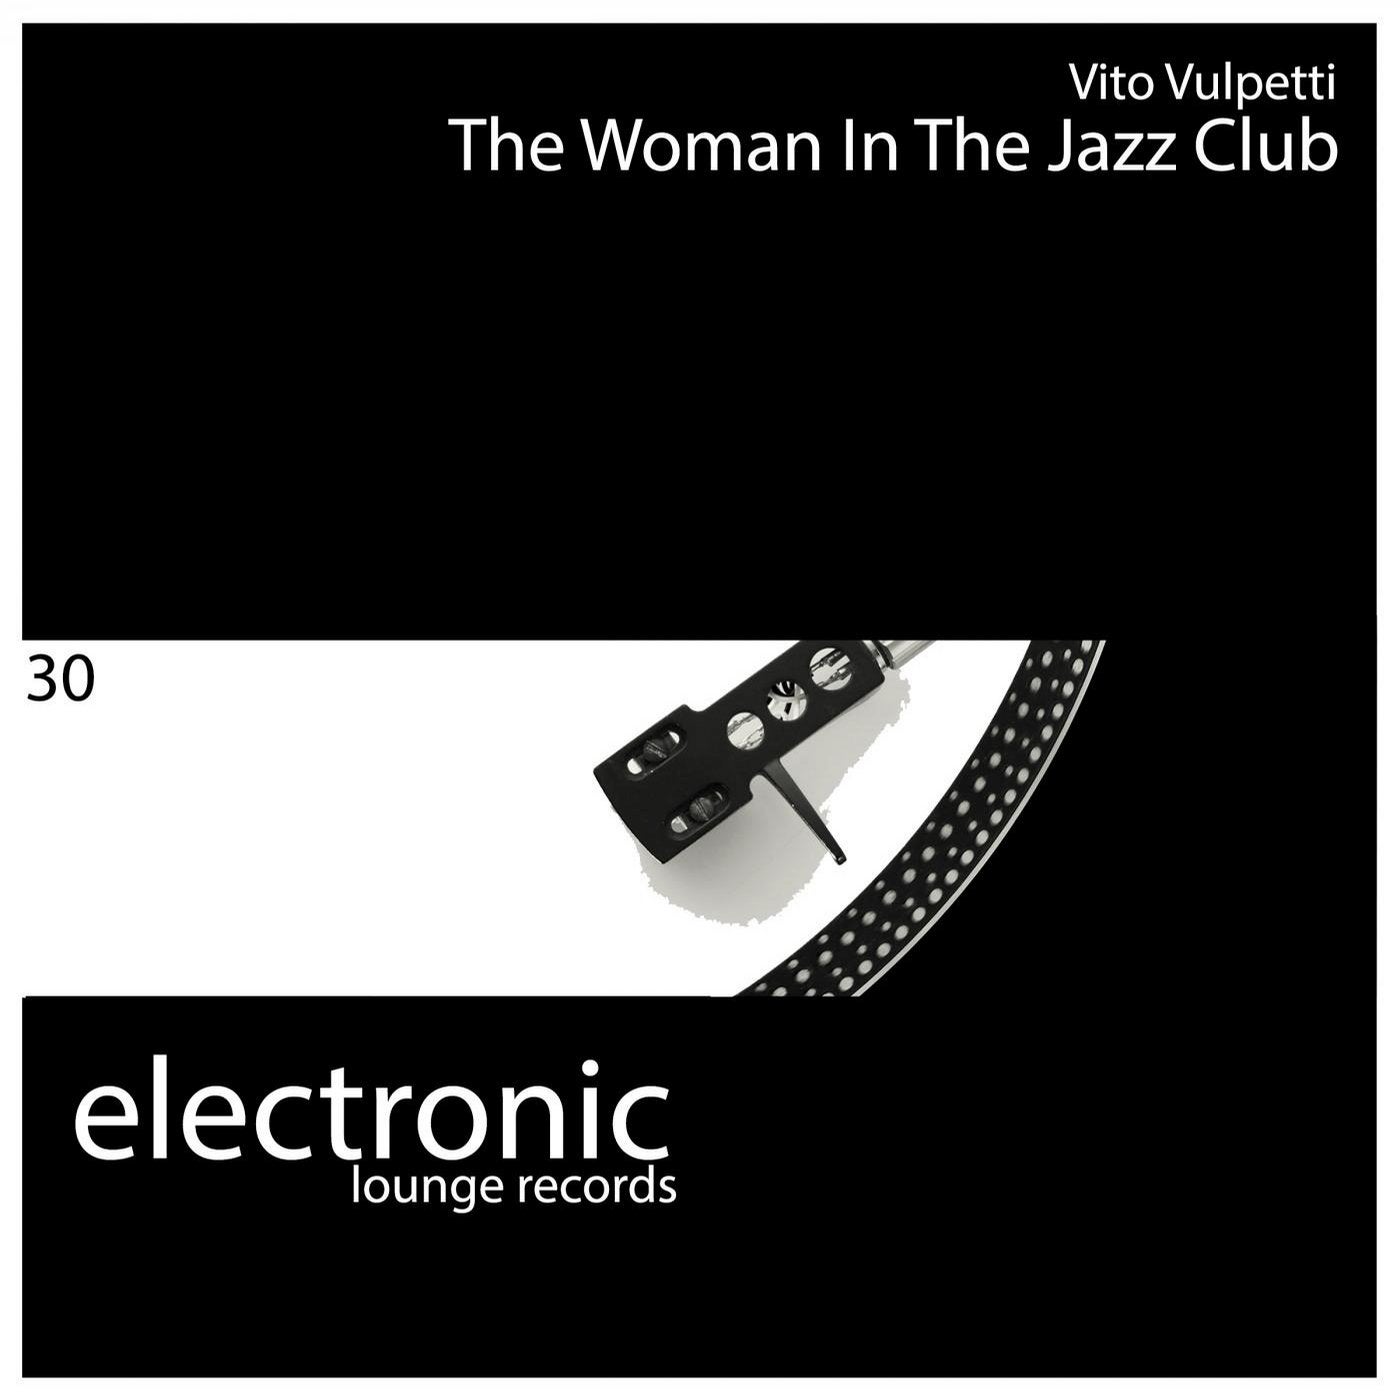 The Woman In The Jazz Club